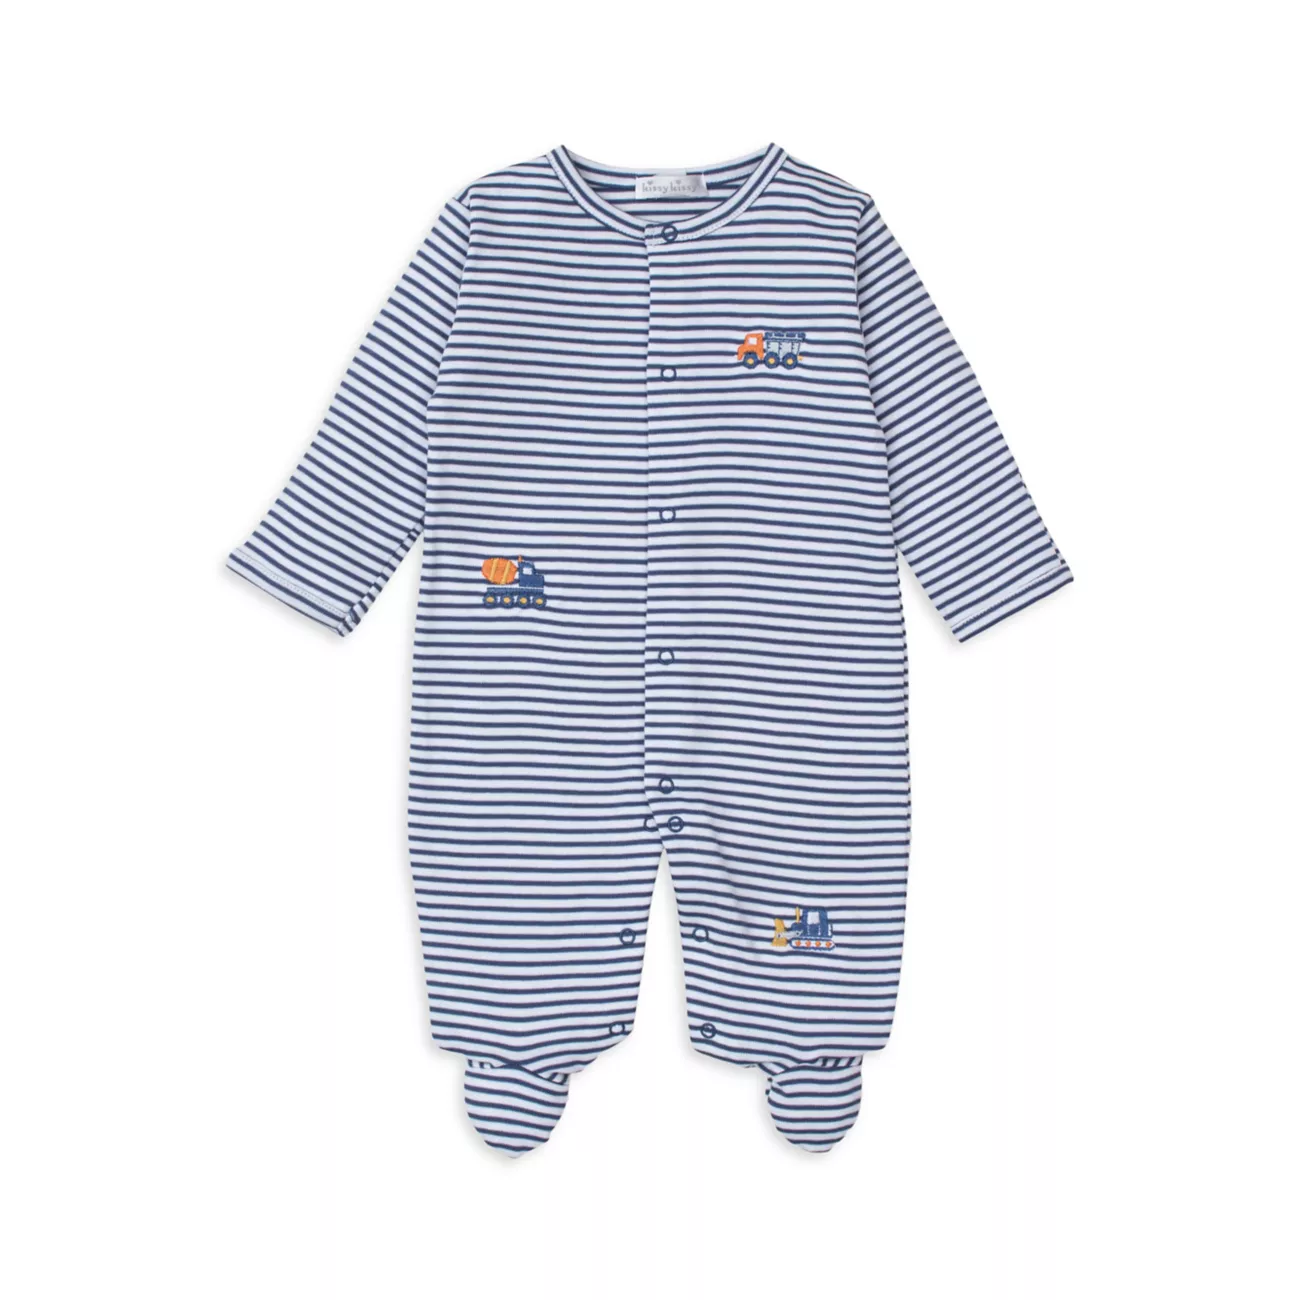 Baby's Embroidered Truck Striped Footie Kissy Kissy